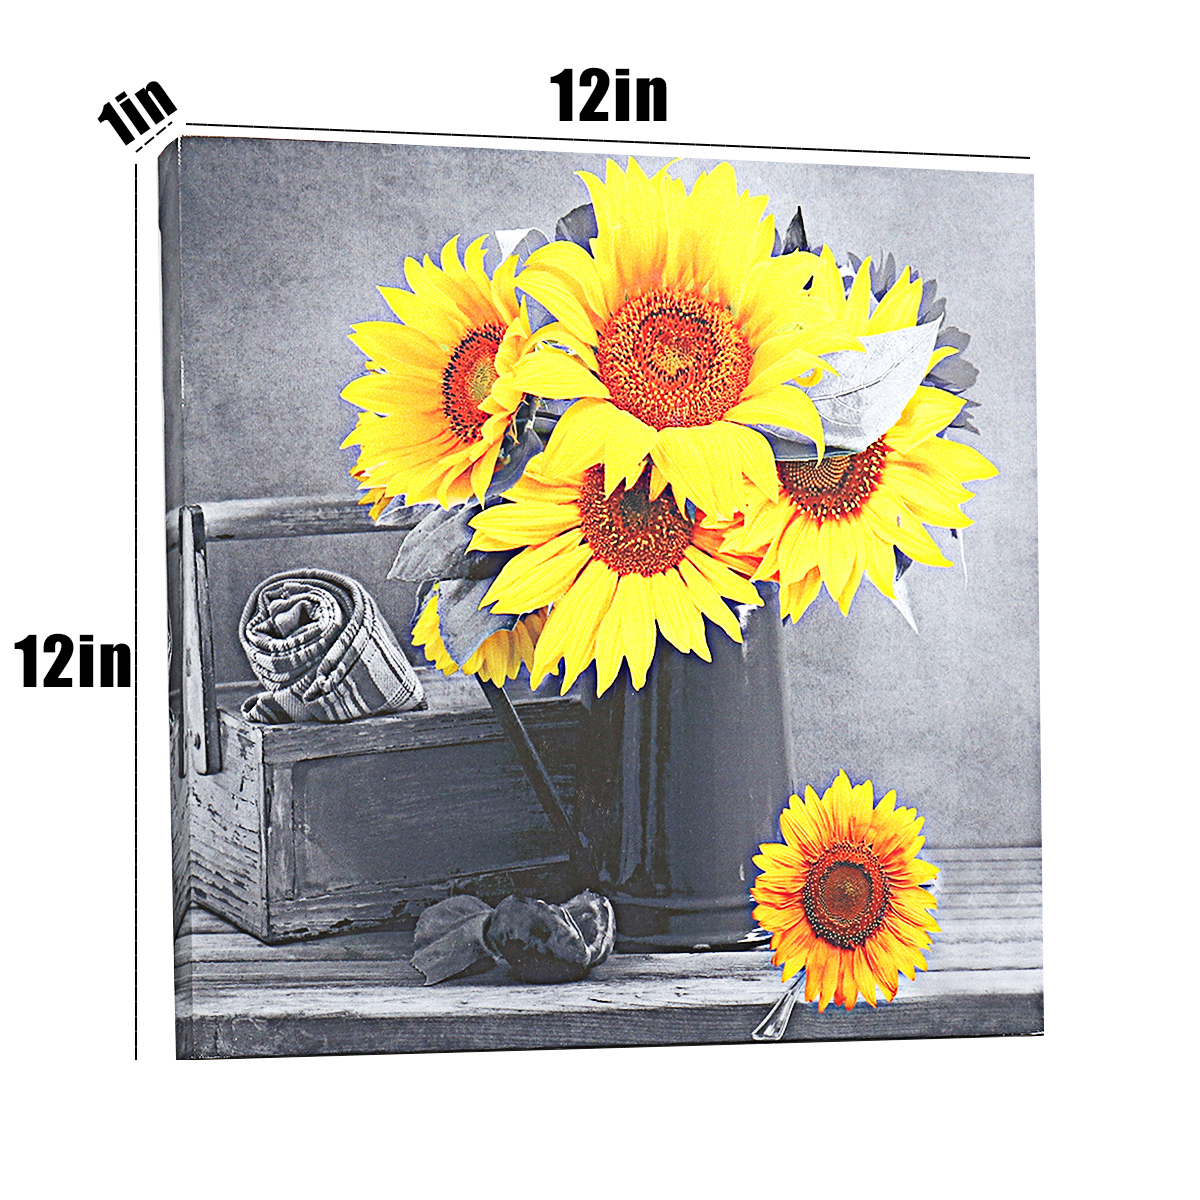 30303-cm-Sunflower-Wall-Art-Painting-Living-Room-Bedroom-Hanging-Canvas-Pictures-Office-Mural-Decora-1791798-4